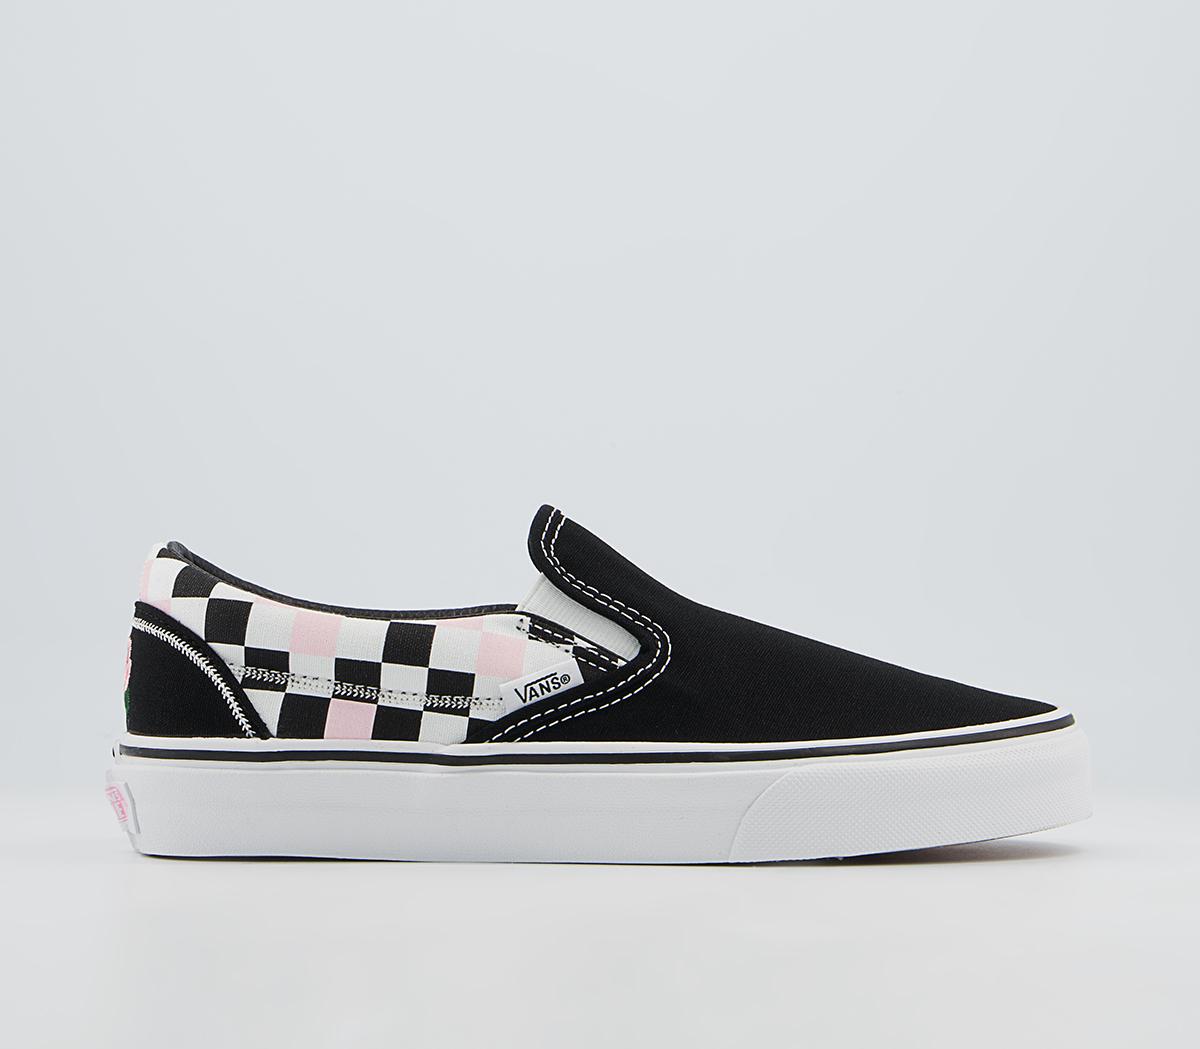 VansClassic Slip On TrainersFeather Stitch Black Blushing Bride Exclusive